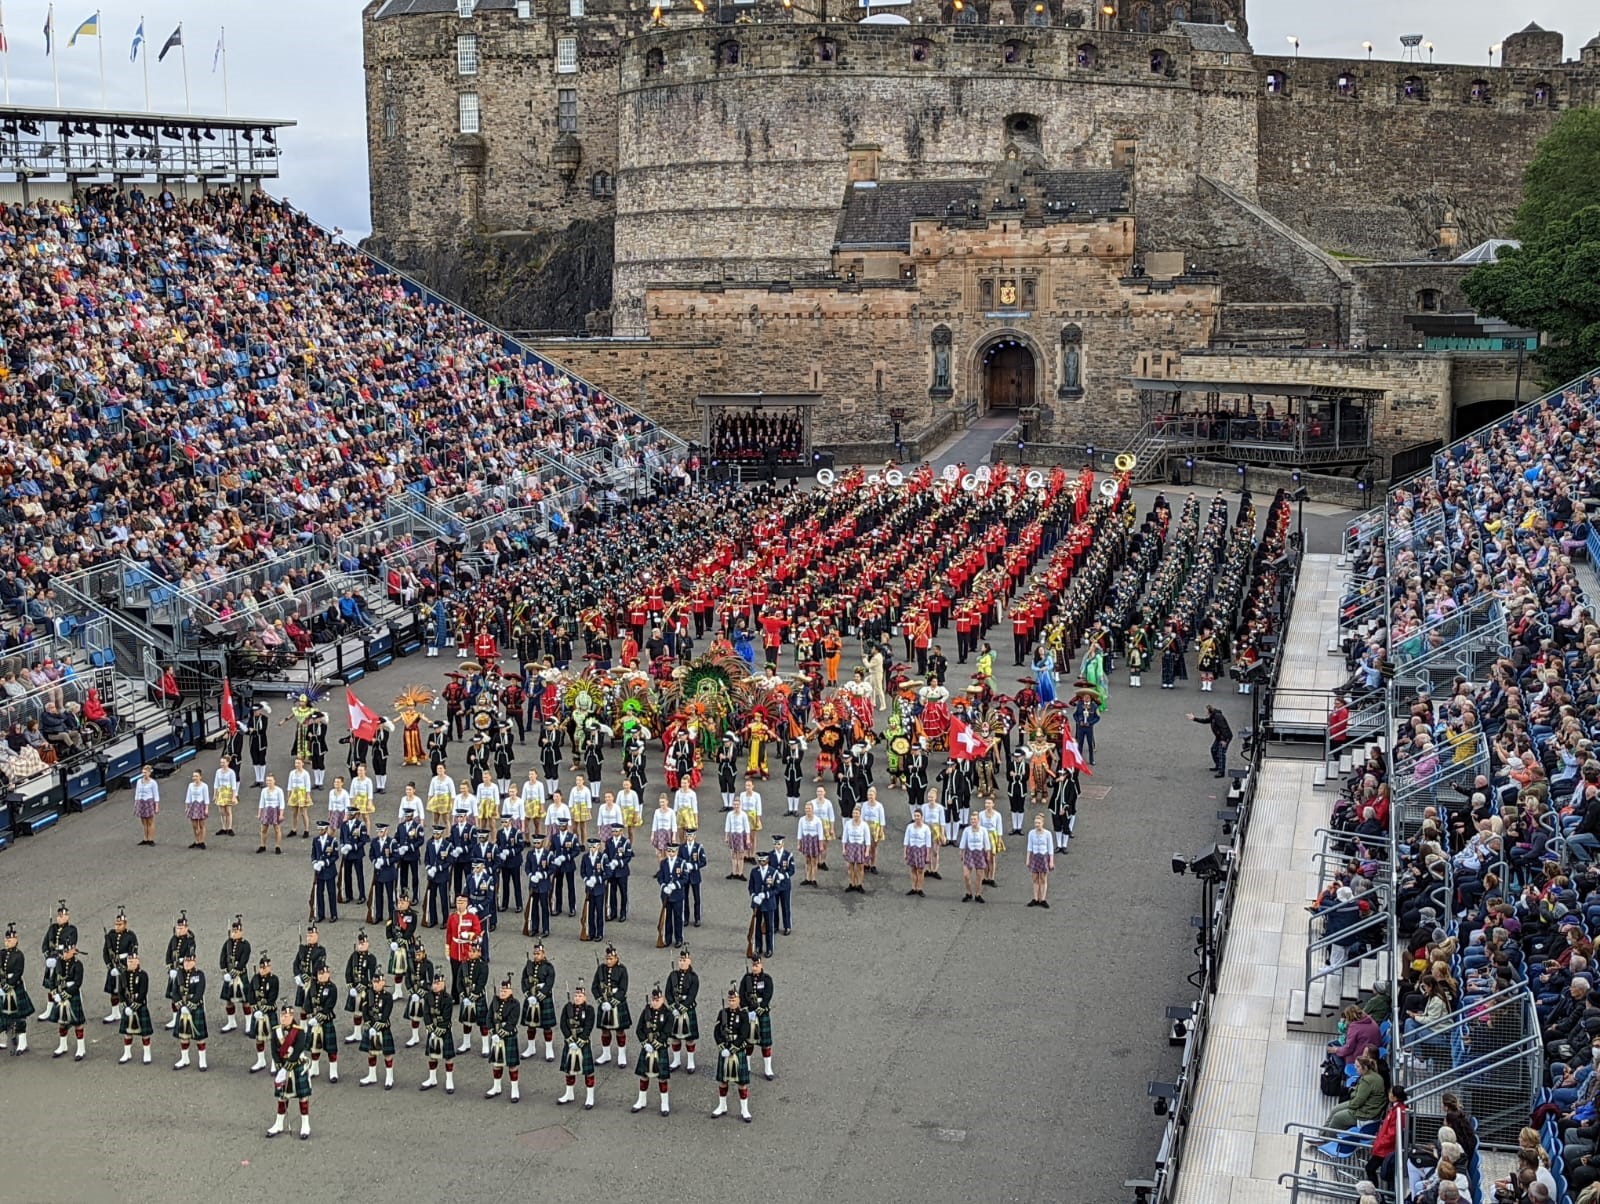 Image shows performers and musicians outside Edinburgh Castle, with crowds watching from the stands. 